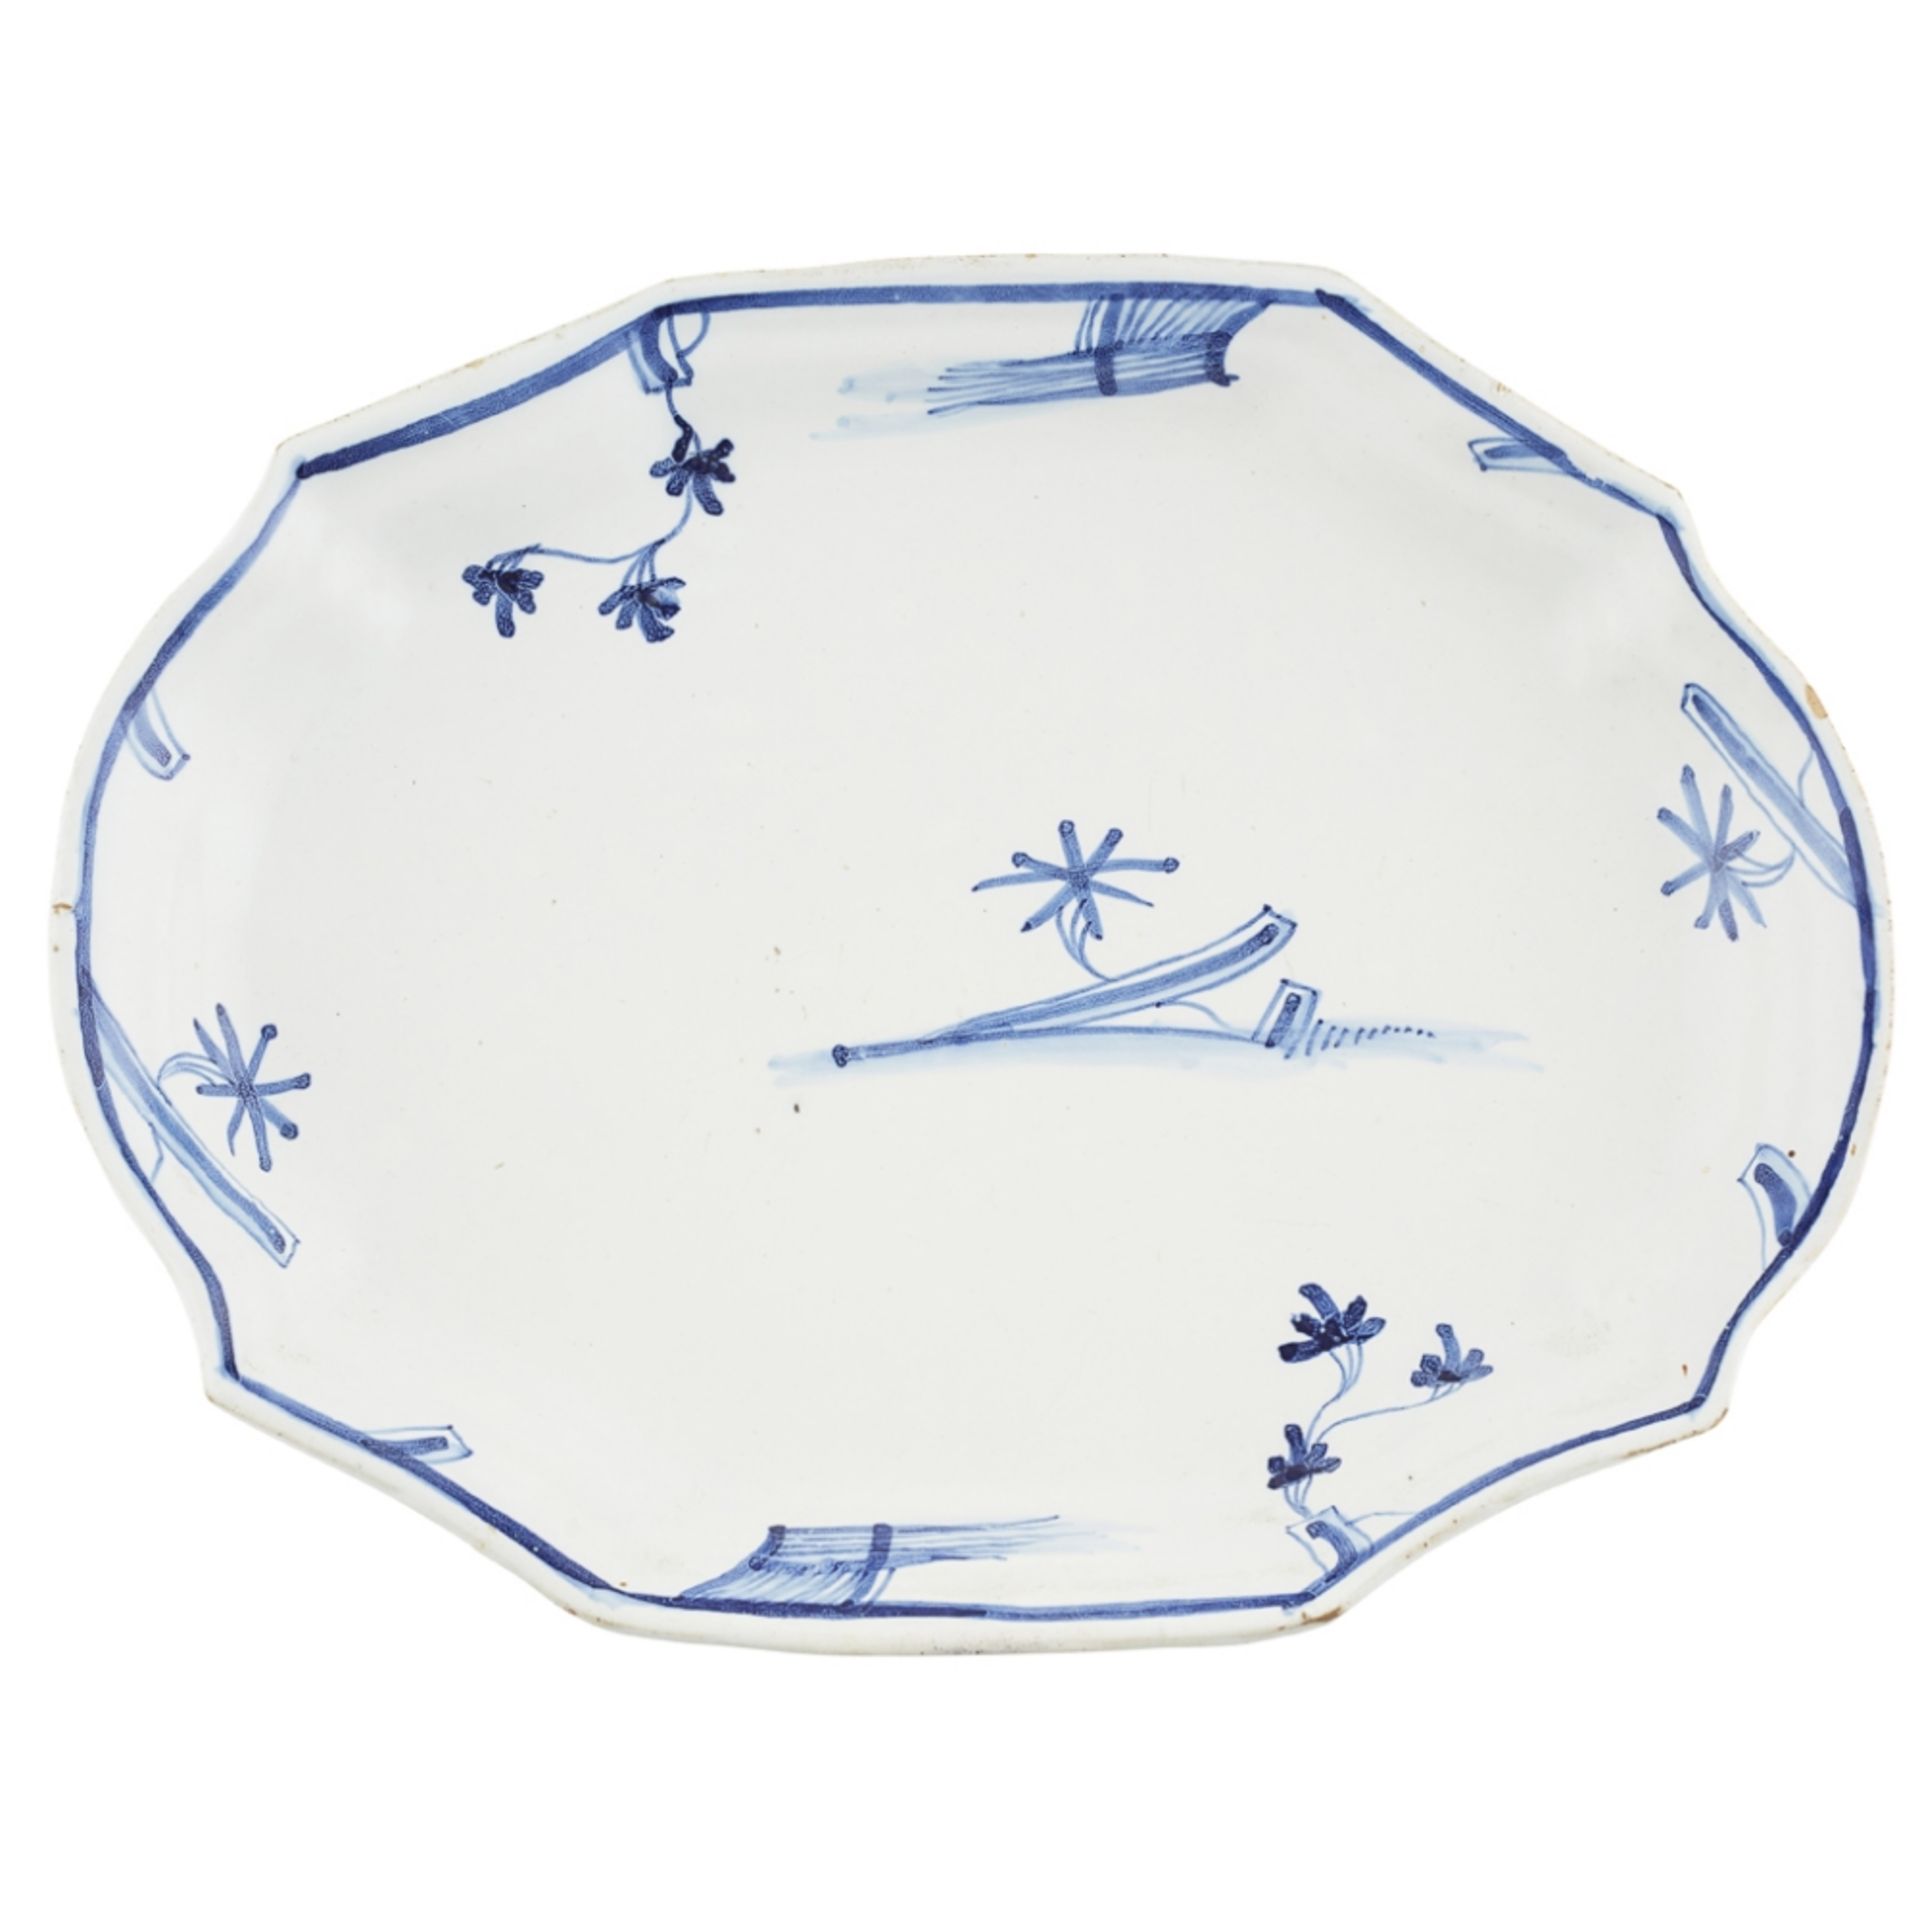 THREE MONOCHROME FRENCH FAIENCE PLATTERS18TH CENTURY of shaped oval form with lobed rims, comprising - Image 3 of 4